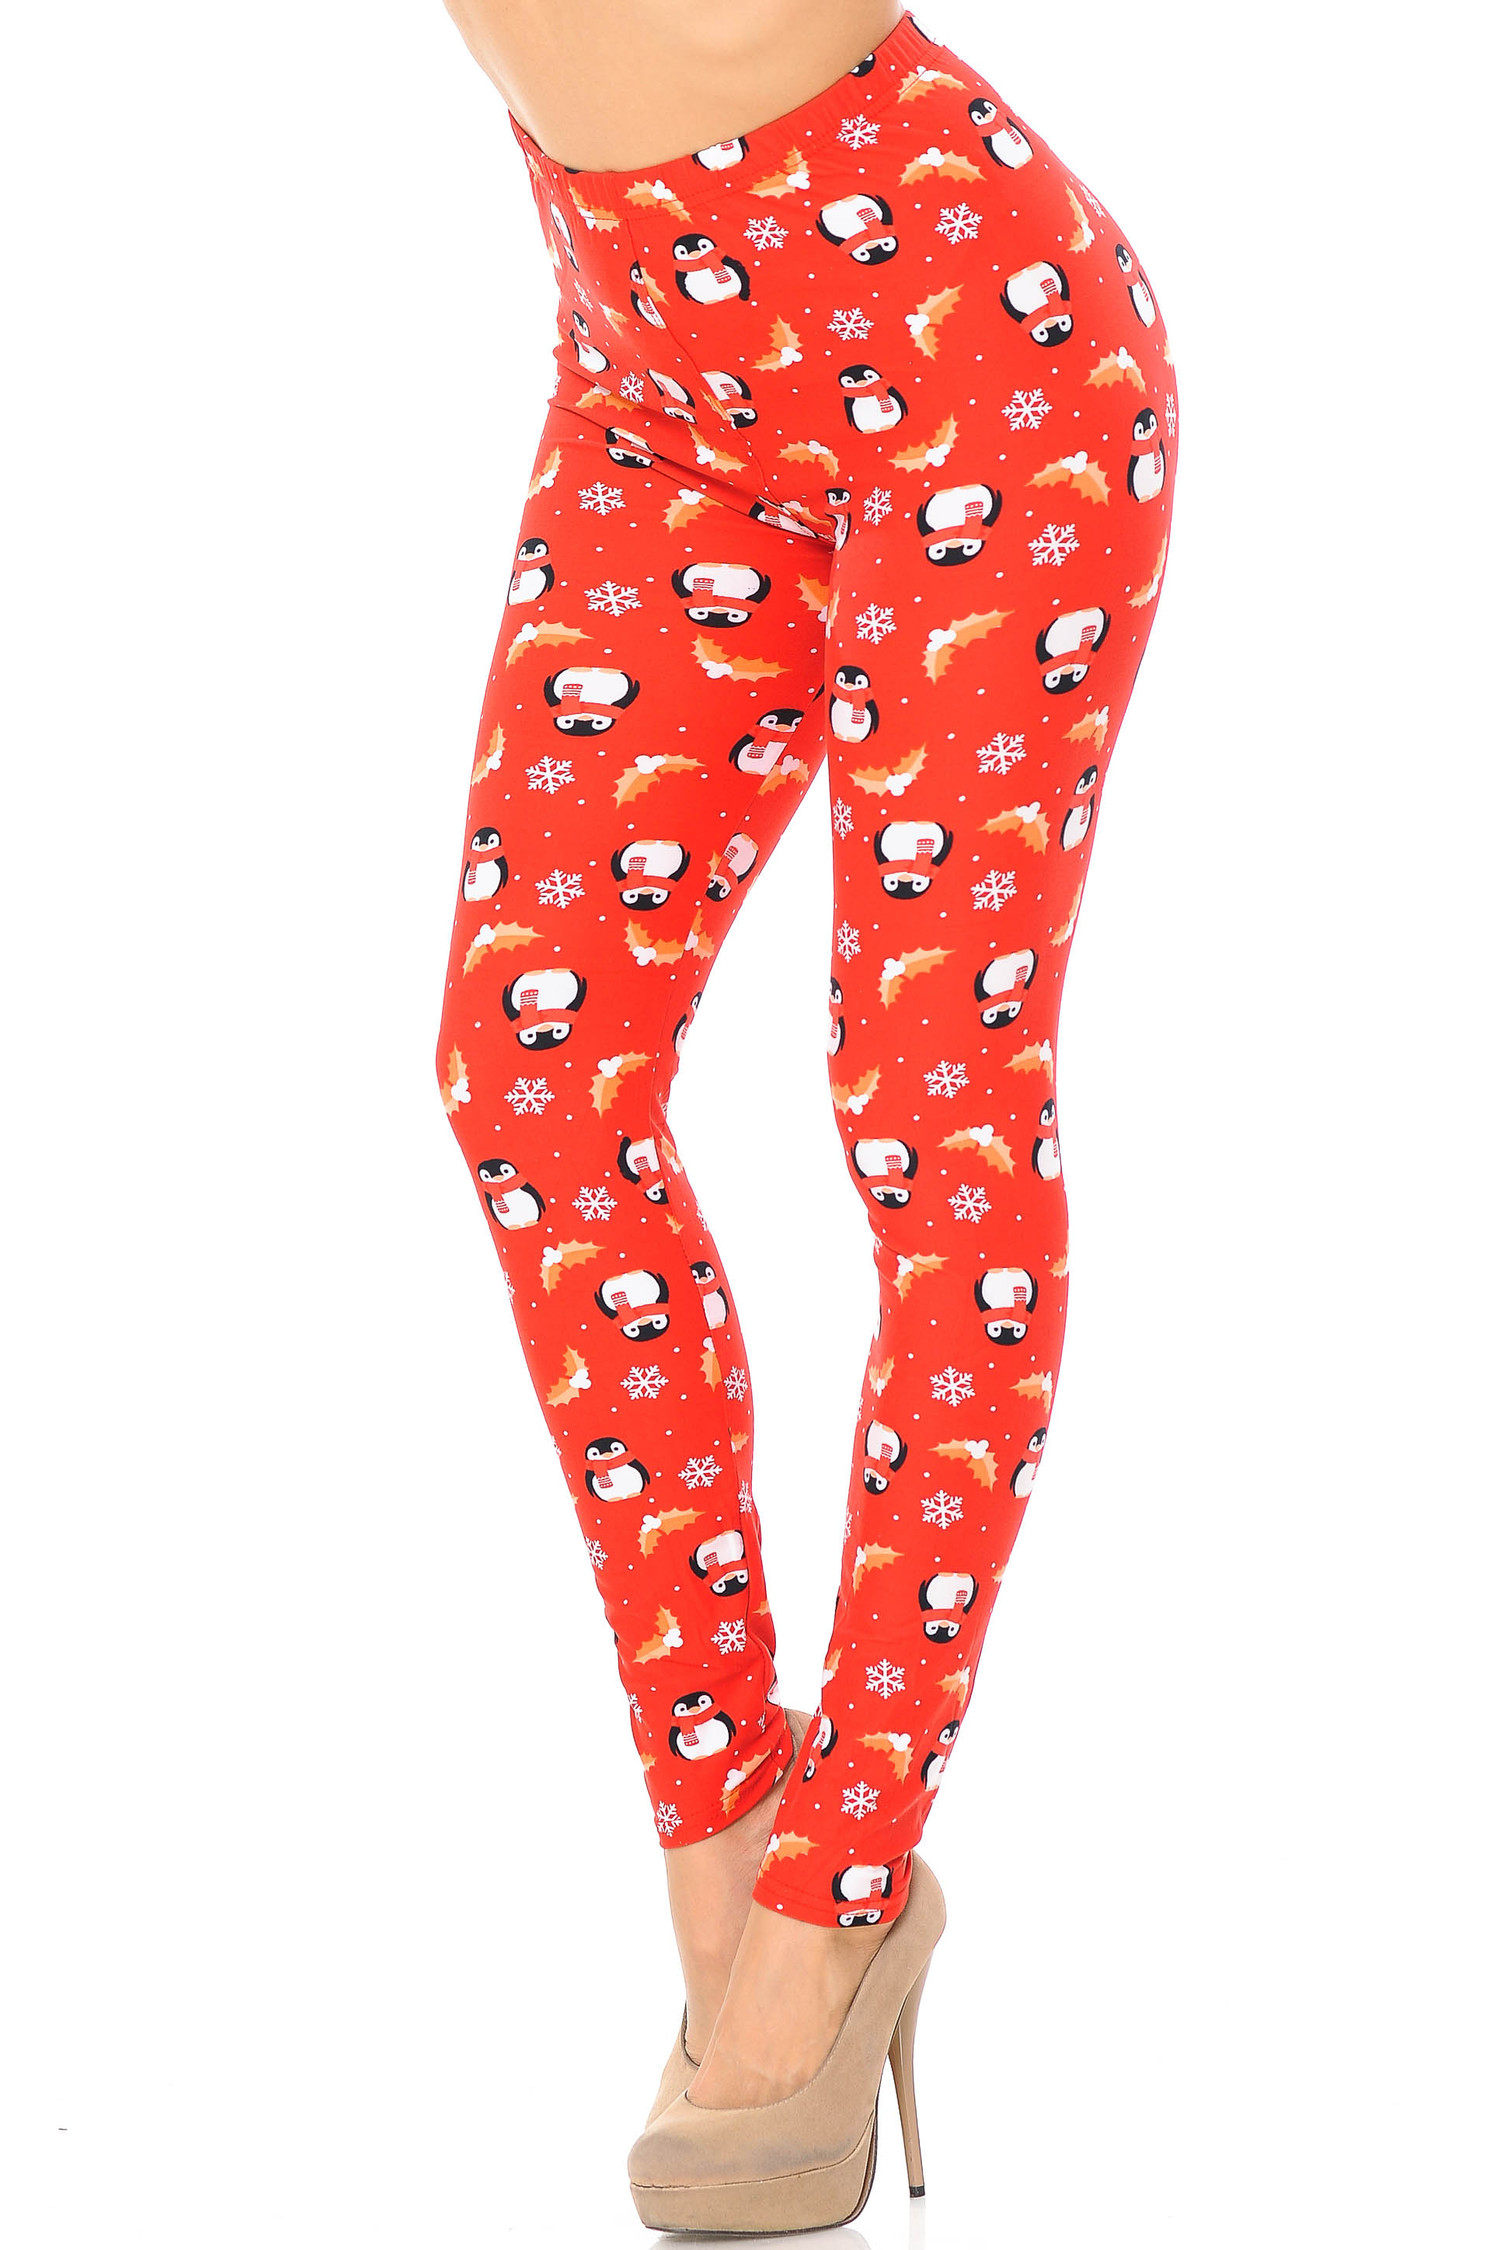 Buttery Soft Ruby Red Penguins Mistletoe and Snowflake Extra Plus Size  Leggings - 3X-5X